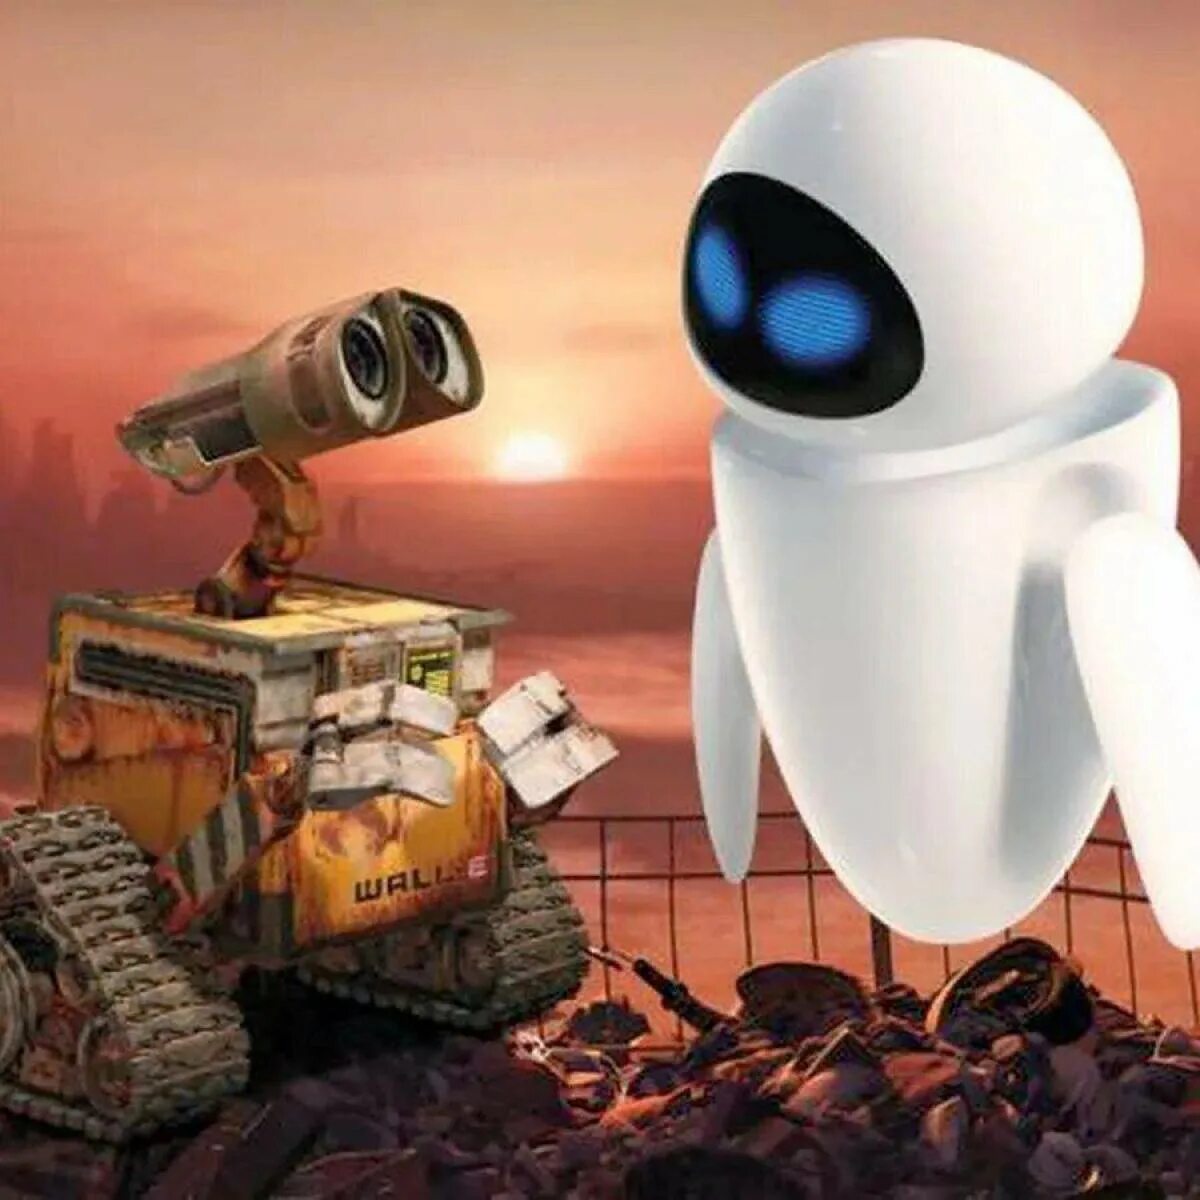 Wolly. Валли (Wall·e, 2008).